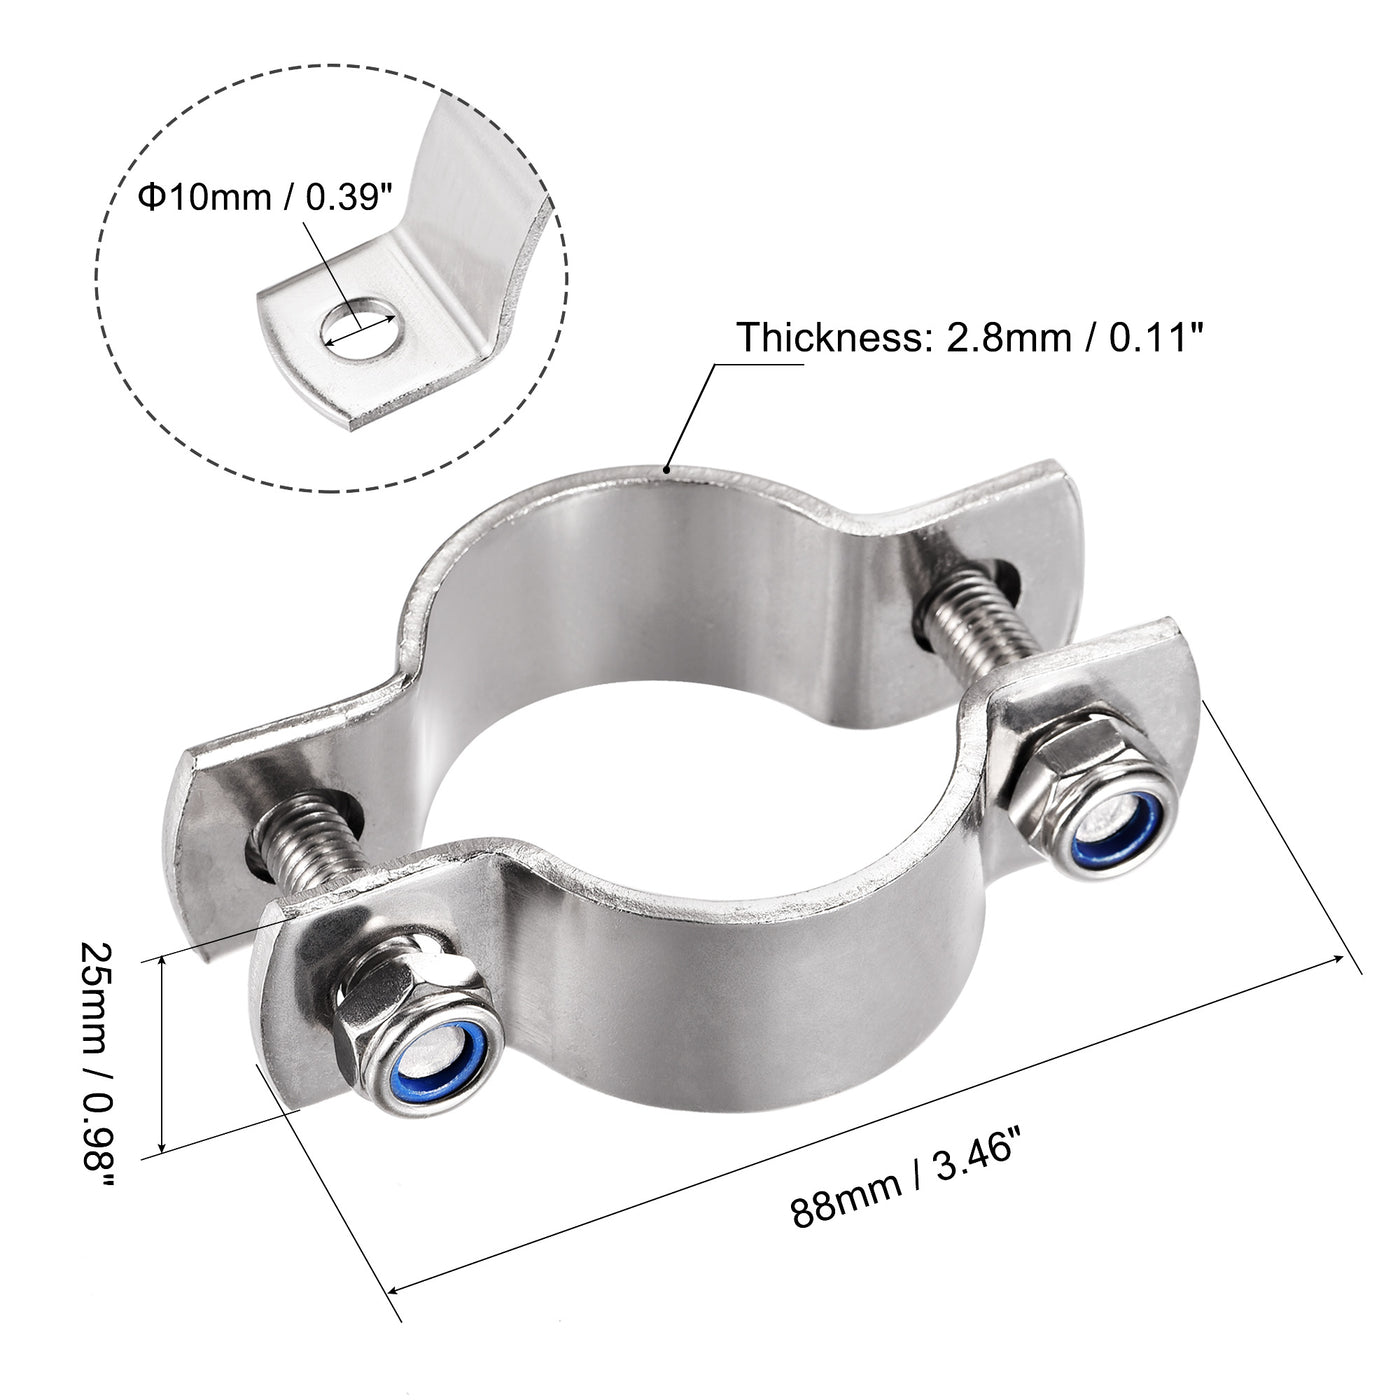 Uxcell Uxcell Wall Mount Ceiling Mount Pipe Support, 304 Stainless Steel Pipe Bracket Clamp for 27mm Pipe 2pcs